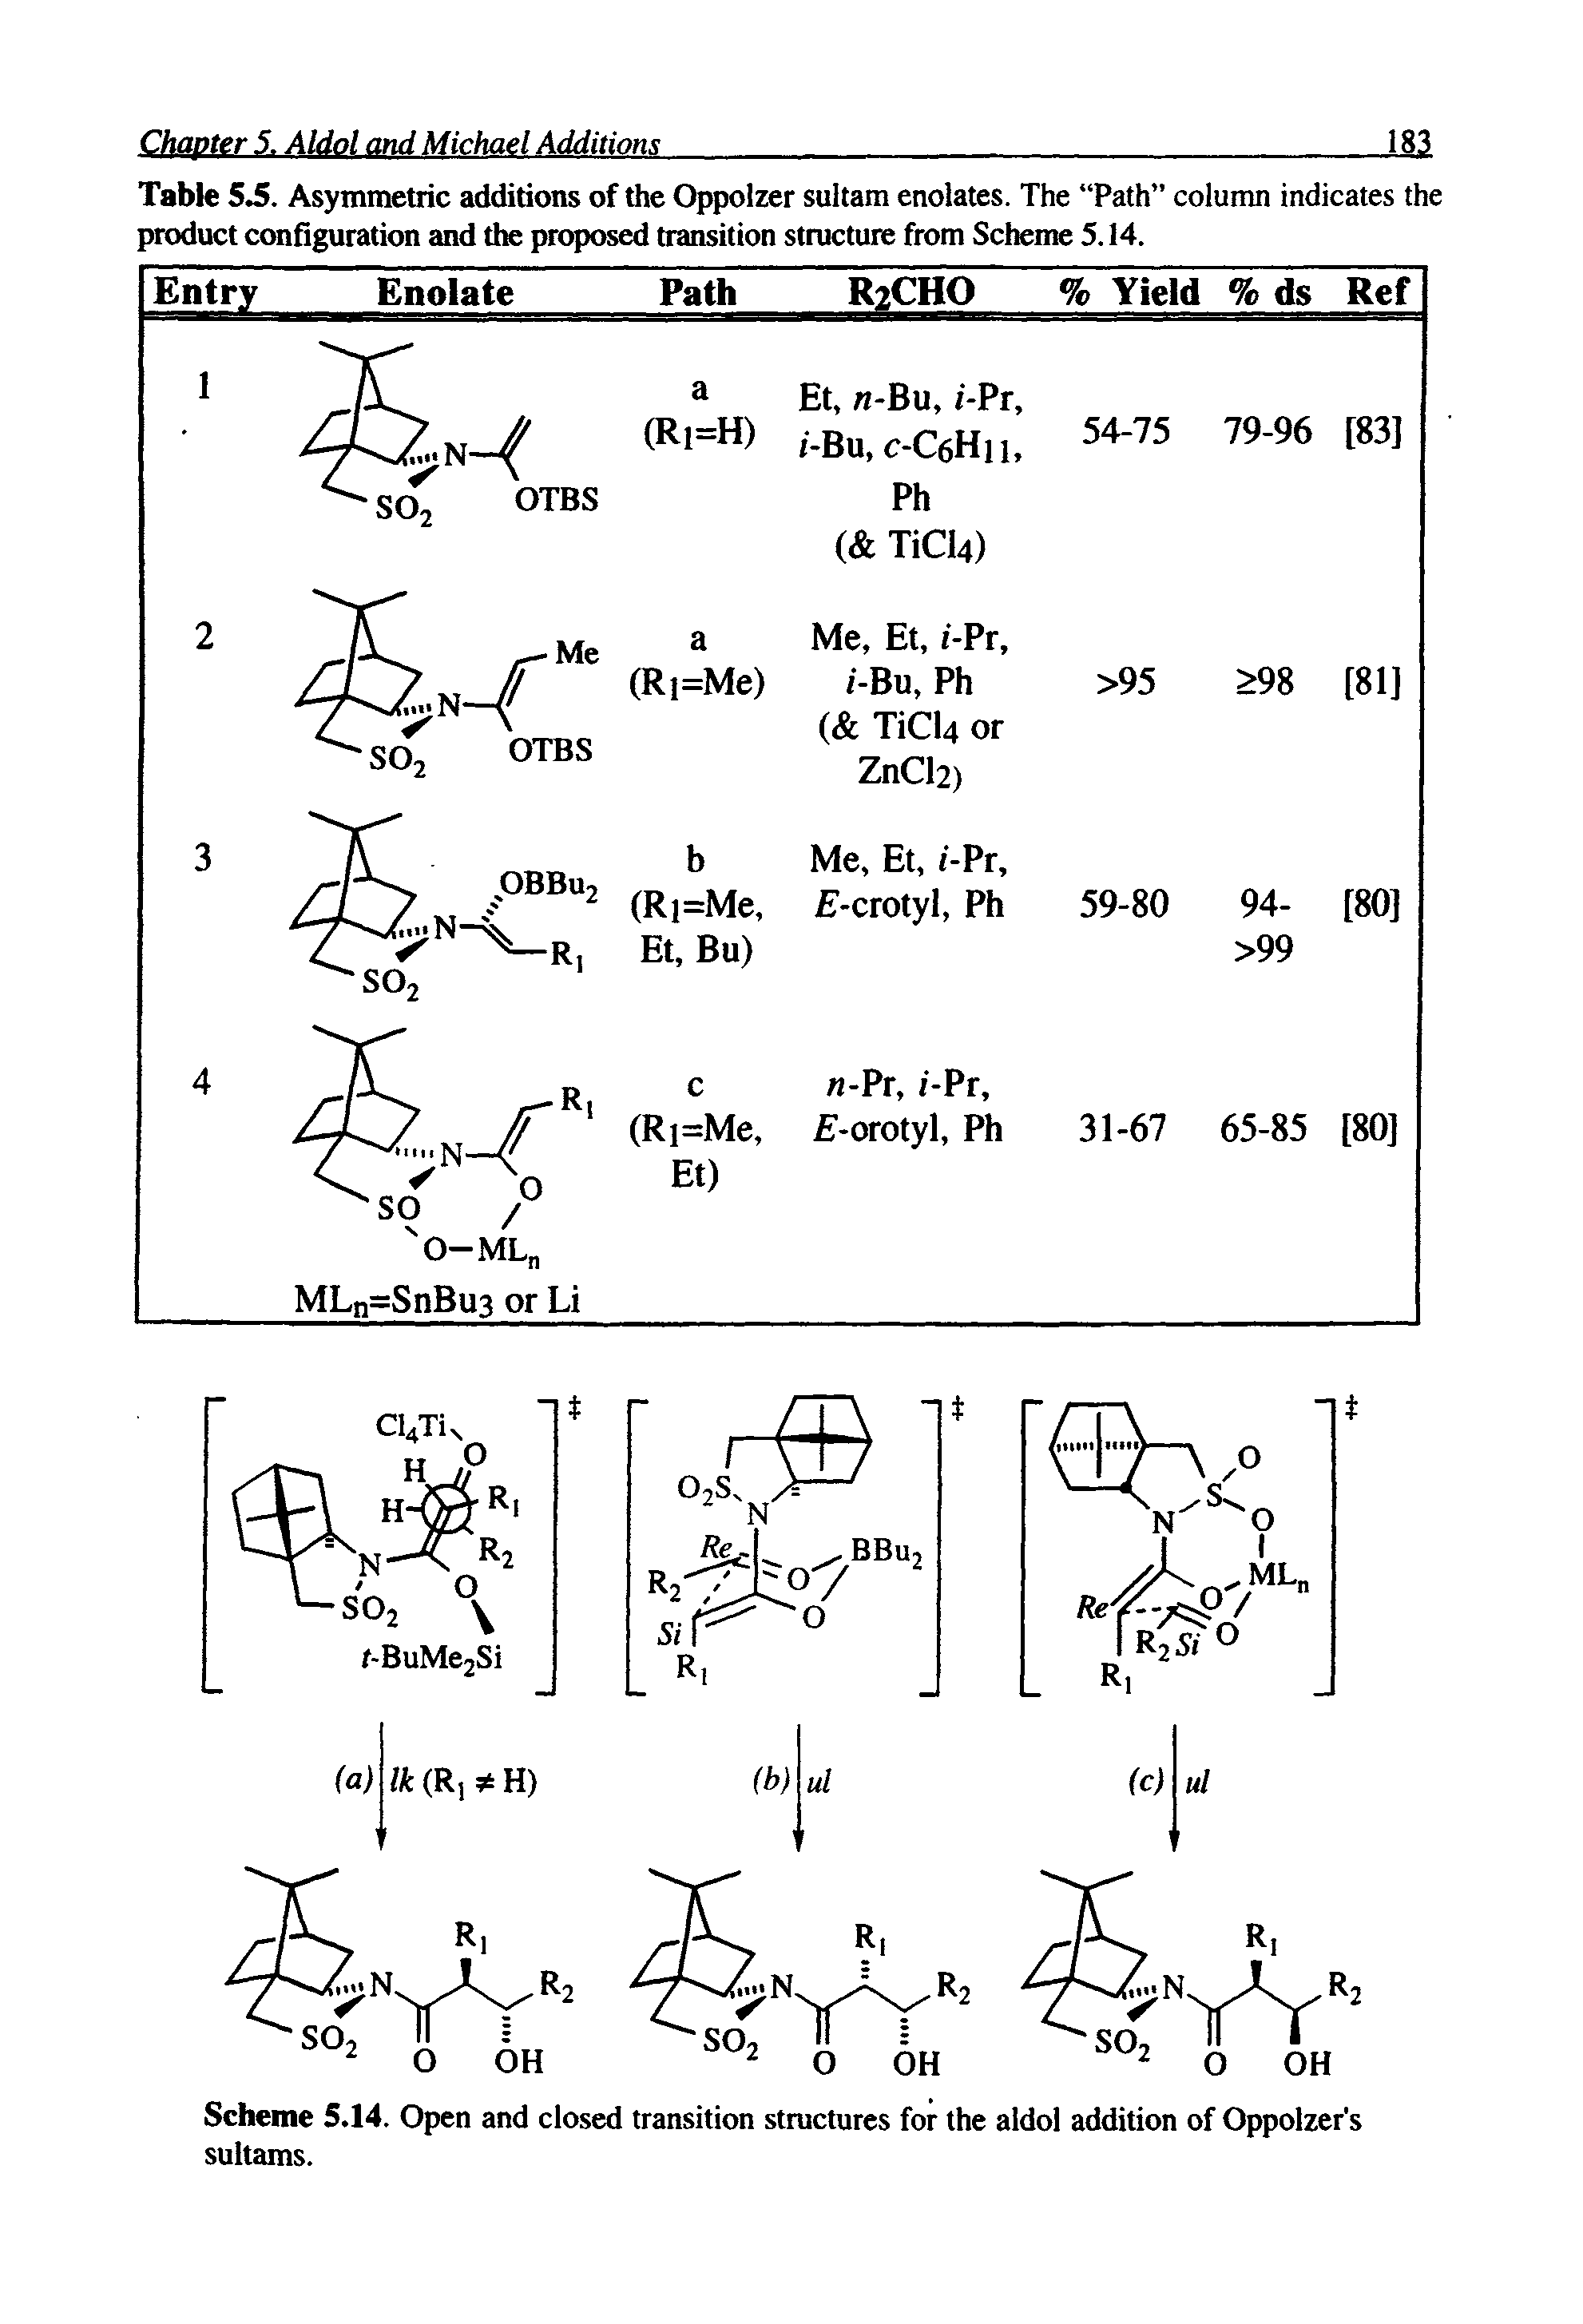 Table 5. Asymmetric additions of the Oppolzer sultam enolates. The Path column indicates the product configuration and the proposed transition structure from Scteme 5.14.